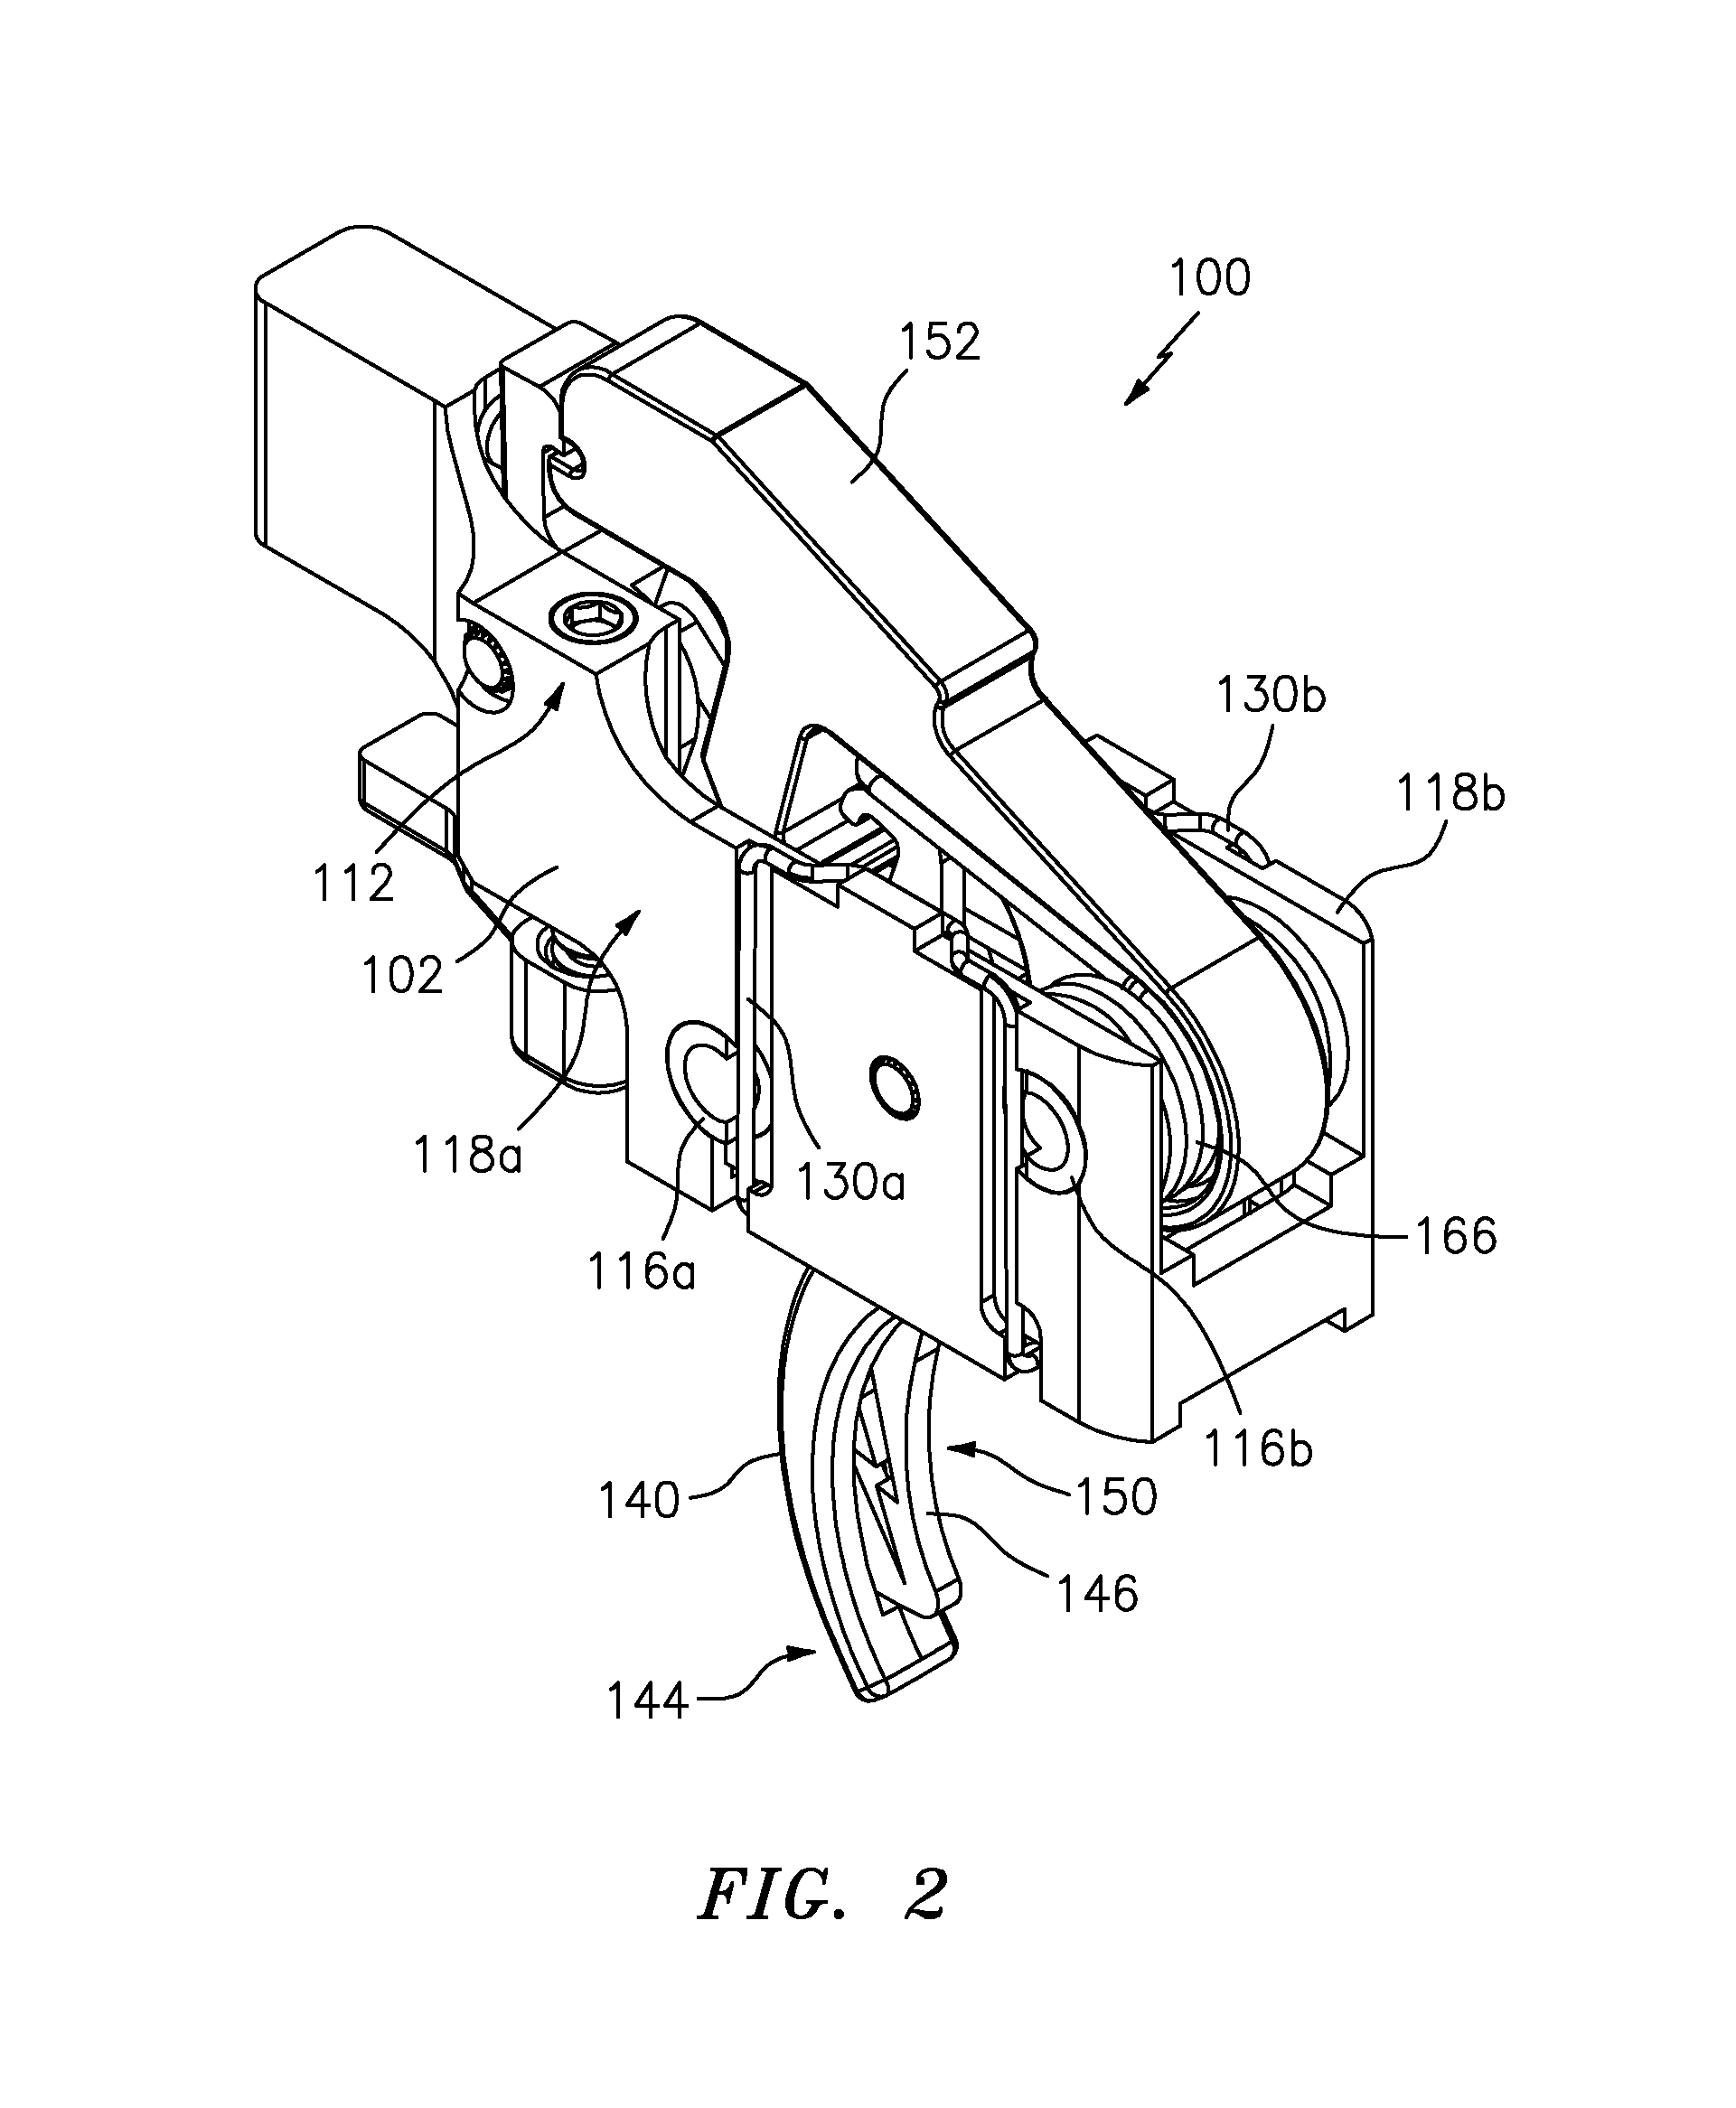 Adjustable modular trigger assembly for firearms